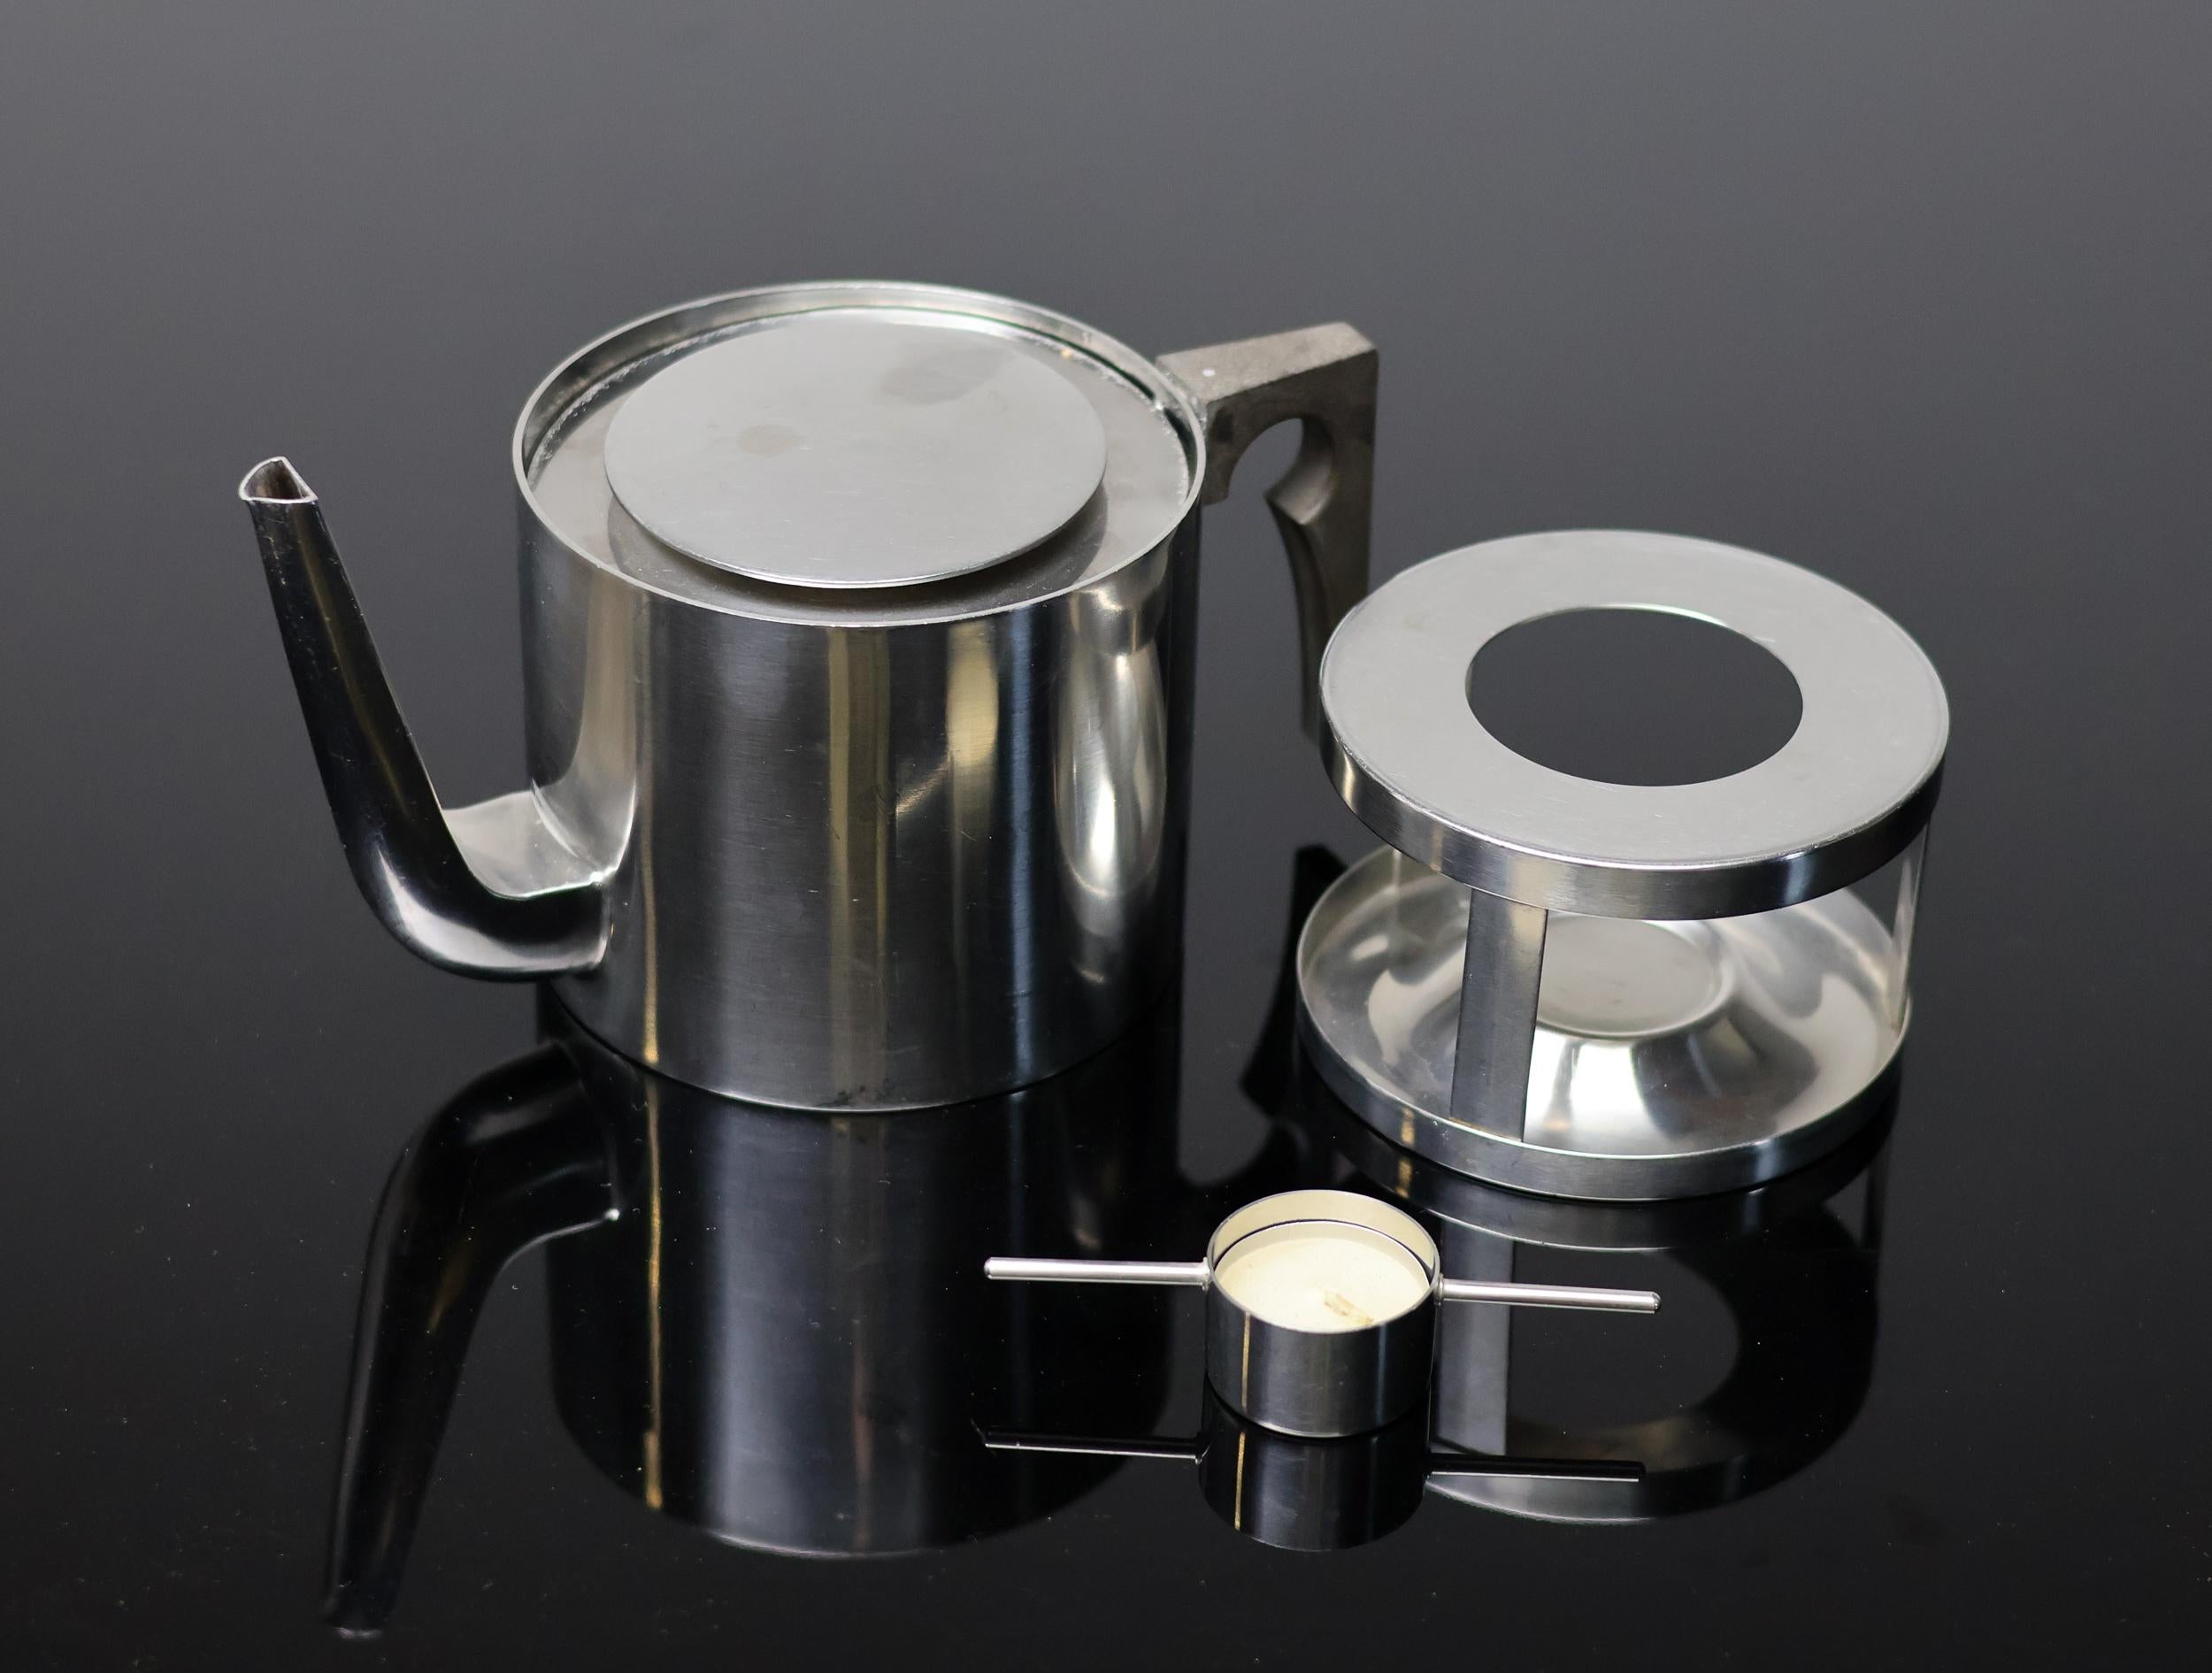 Complete Cylinda Line stainless steel tea set, designed in 1967 by Arne Jacobsen and manufactured by Stelton Denmark. 
Consisting of: 
tea pot with lid, 9.25